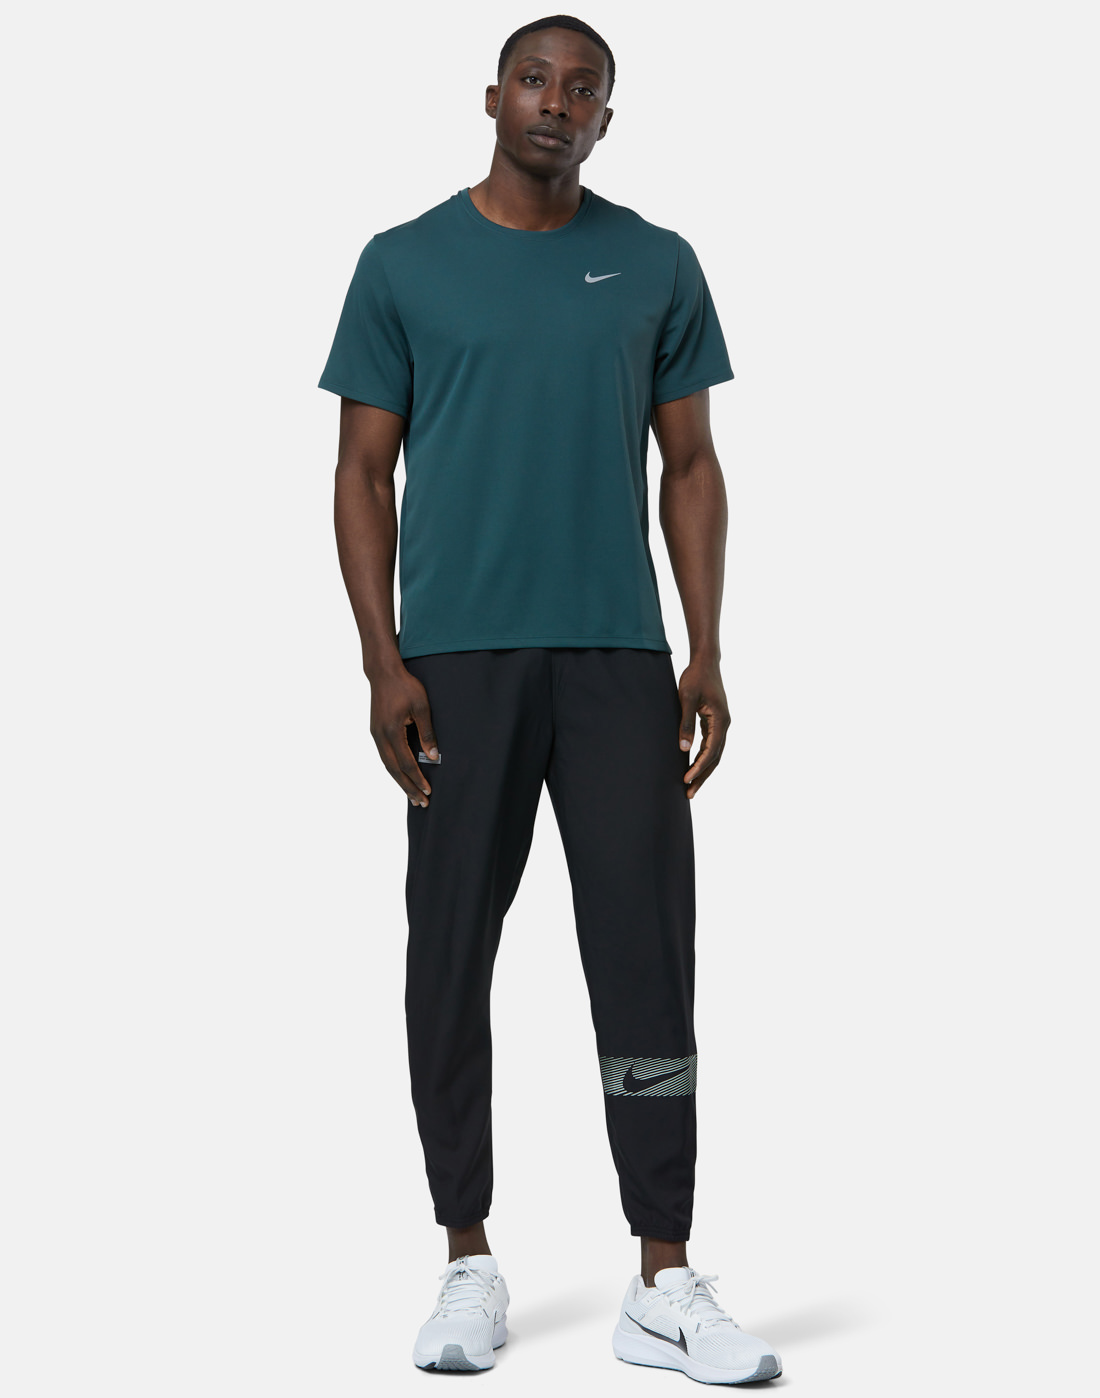 Nike Mens Miler T-Shirt - Green | Life Style Sports IE